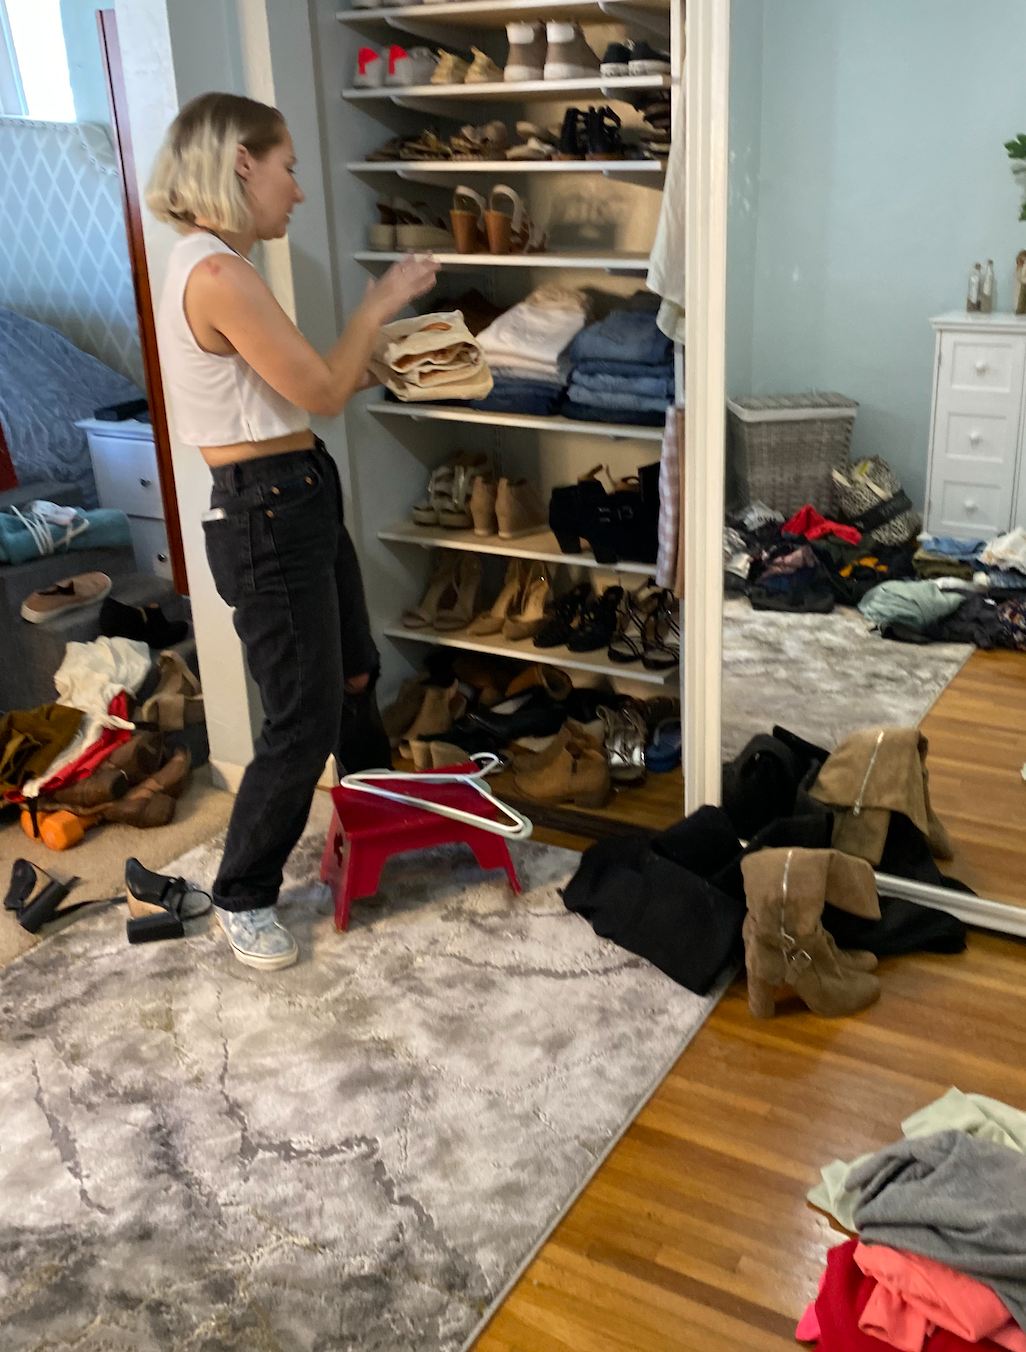 Woman standing in front of shelves with shoes and clothes and putting folded clothes on them